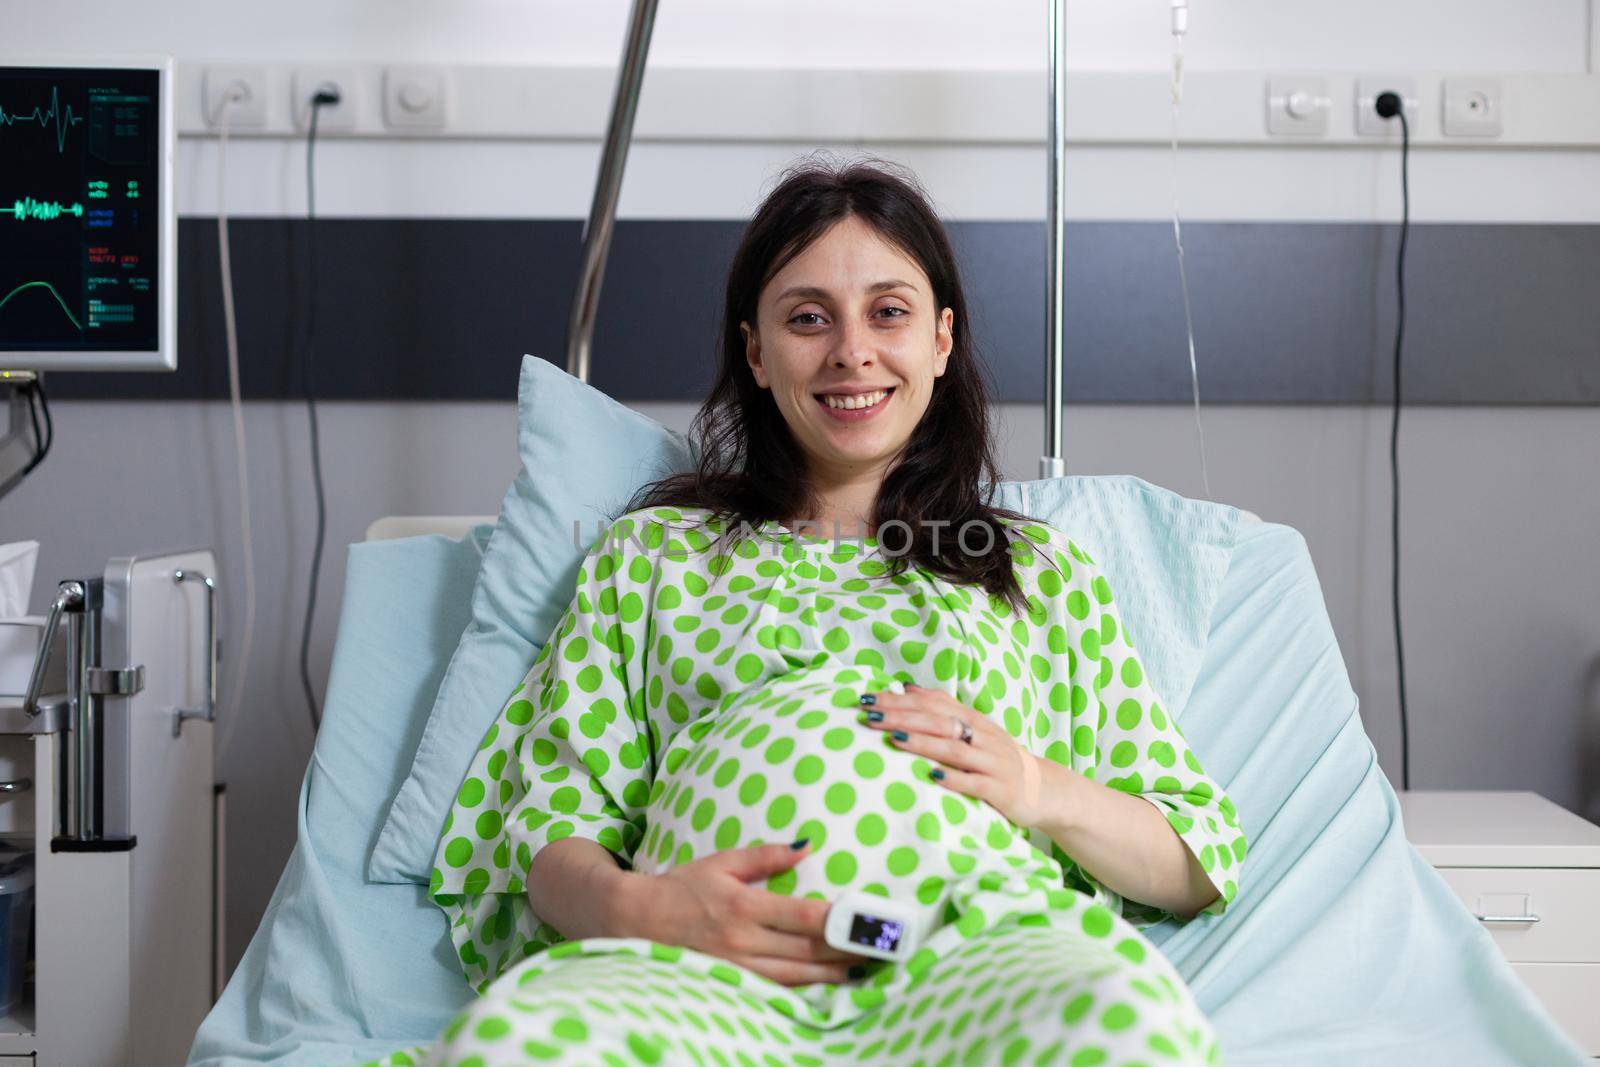 Portrait of pregnant woman sitting in hospital ward bed, looking at camera. Young person smiling, waiting for child delivery and parenthood at medical clinic. Adult with baby bump